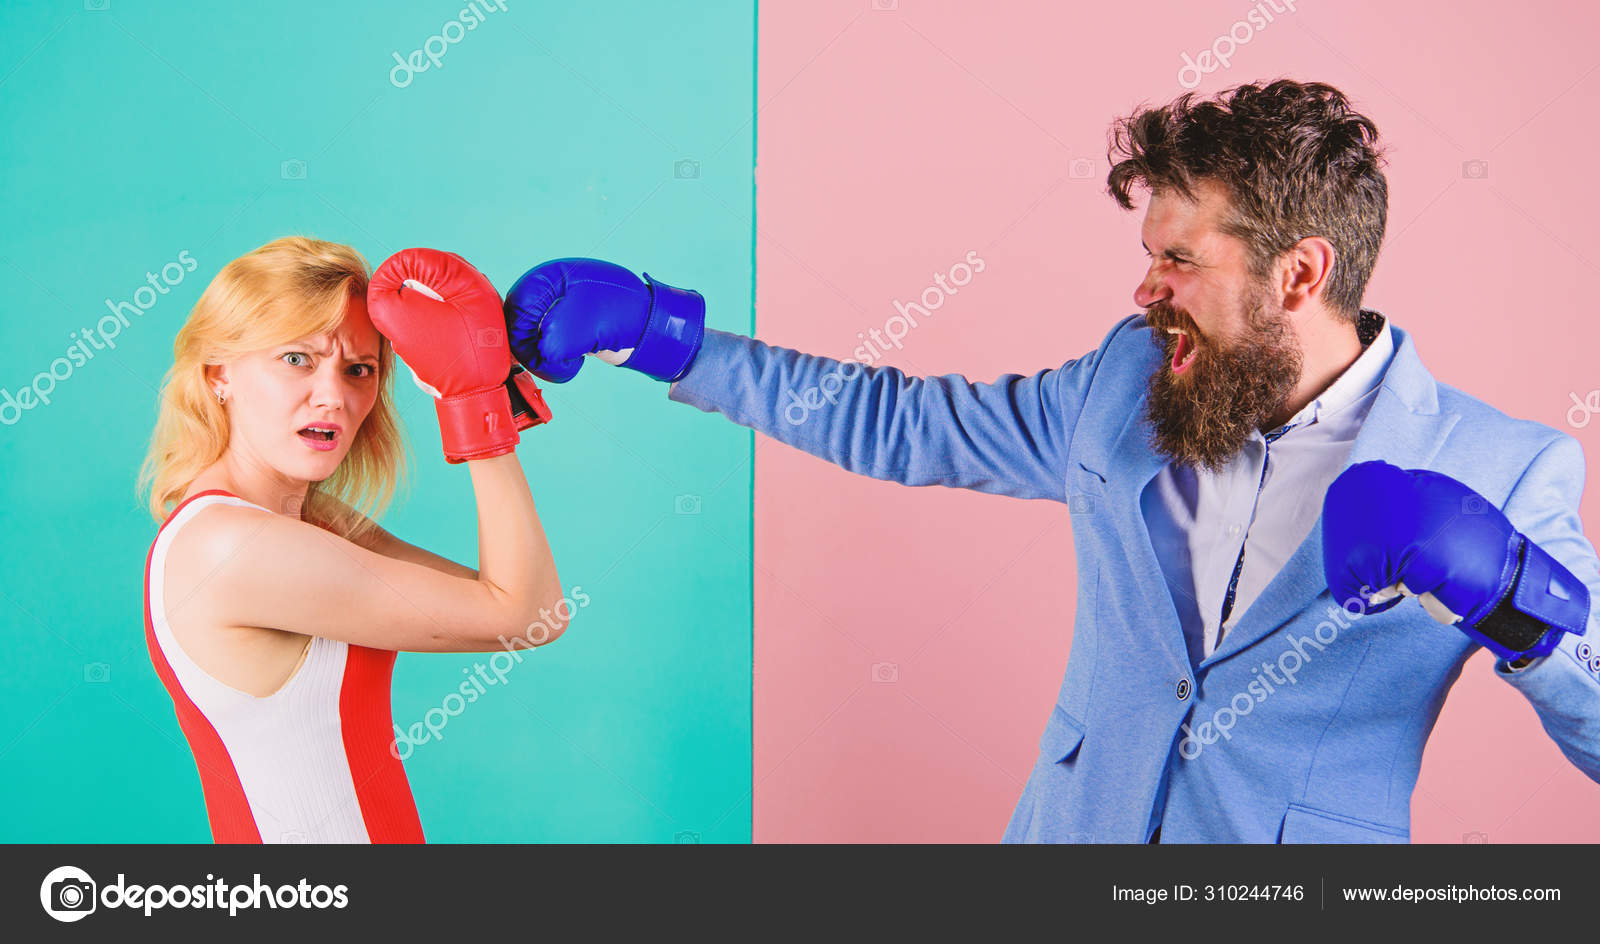 Couple in love competing in boxing. Female and male boxers fighting in gloves. Domination concept. Gender battle. Gender equal rights image